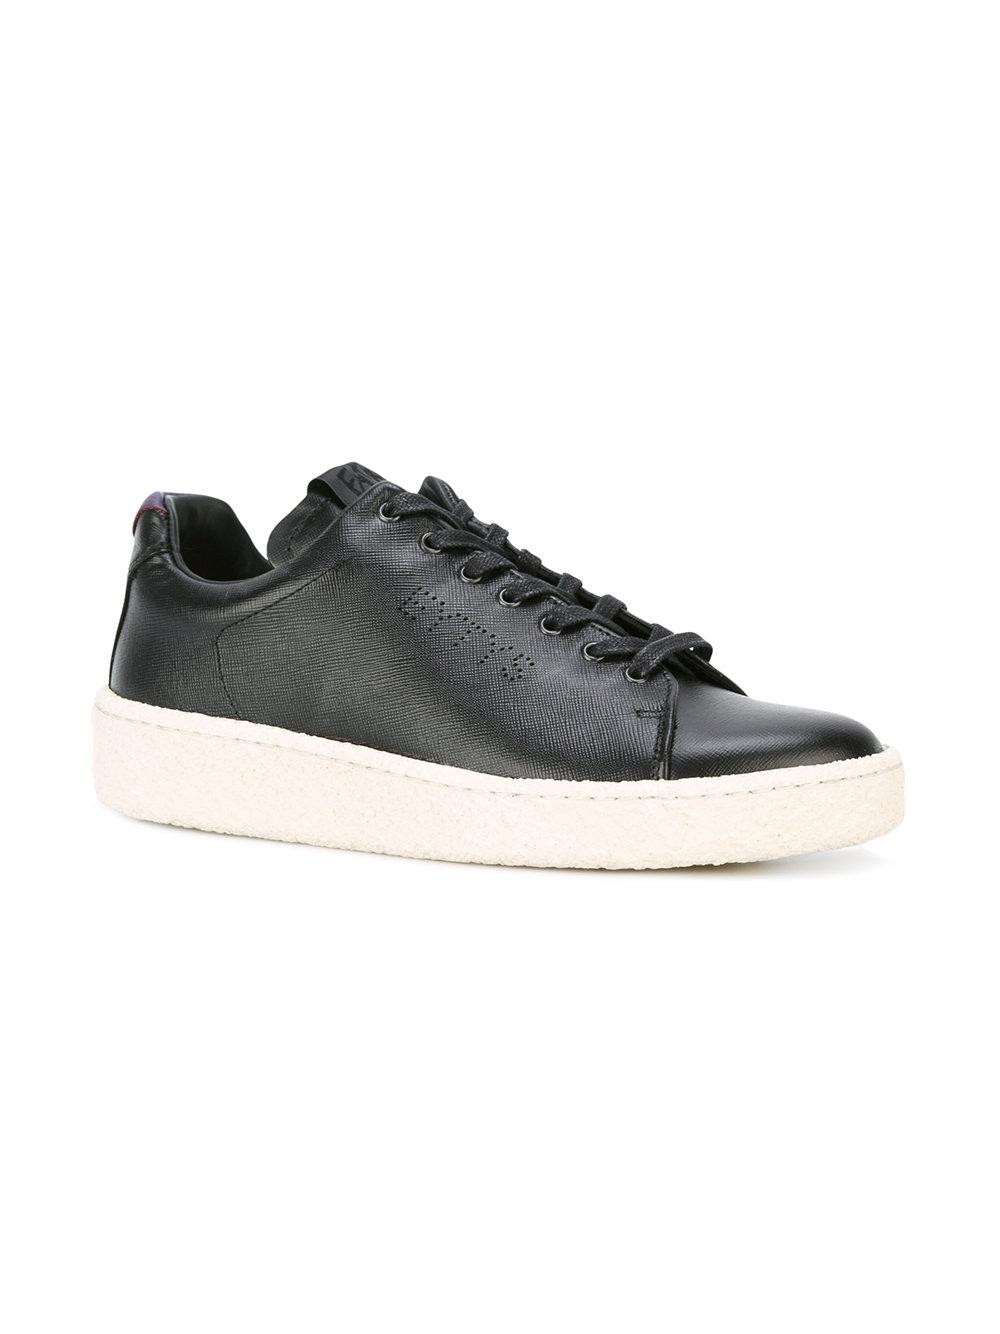 Eytys Leather Ace Structure Sneakers in Black for Men - Lyst